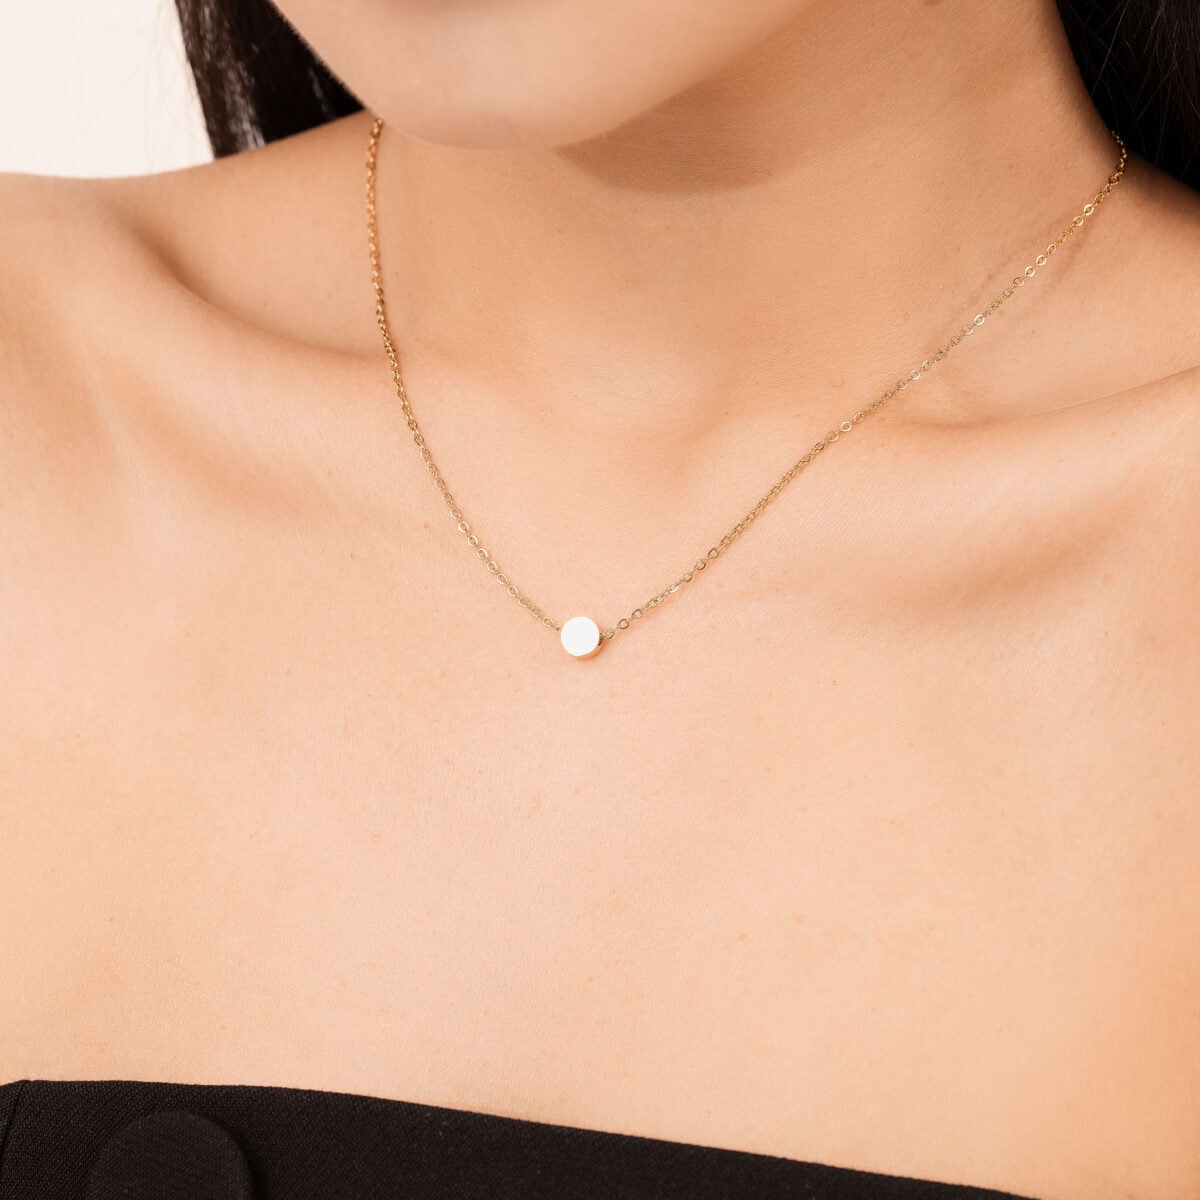 https://m.clubbella.co/product/dainty-sphere-necklace/ Dainty Sphere Necklace (3)